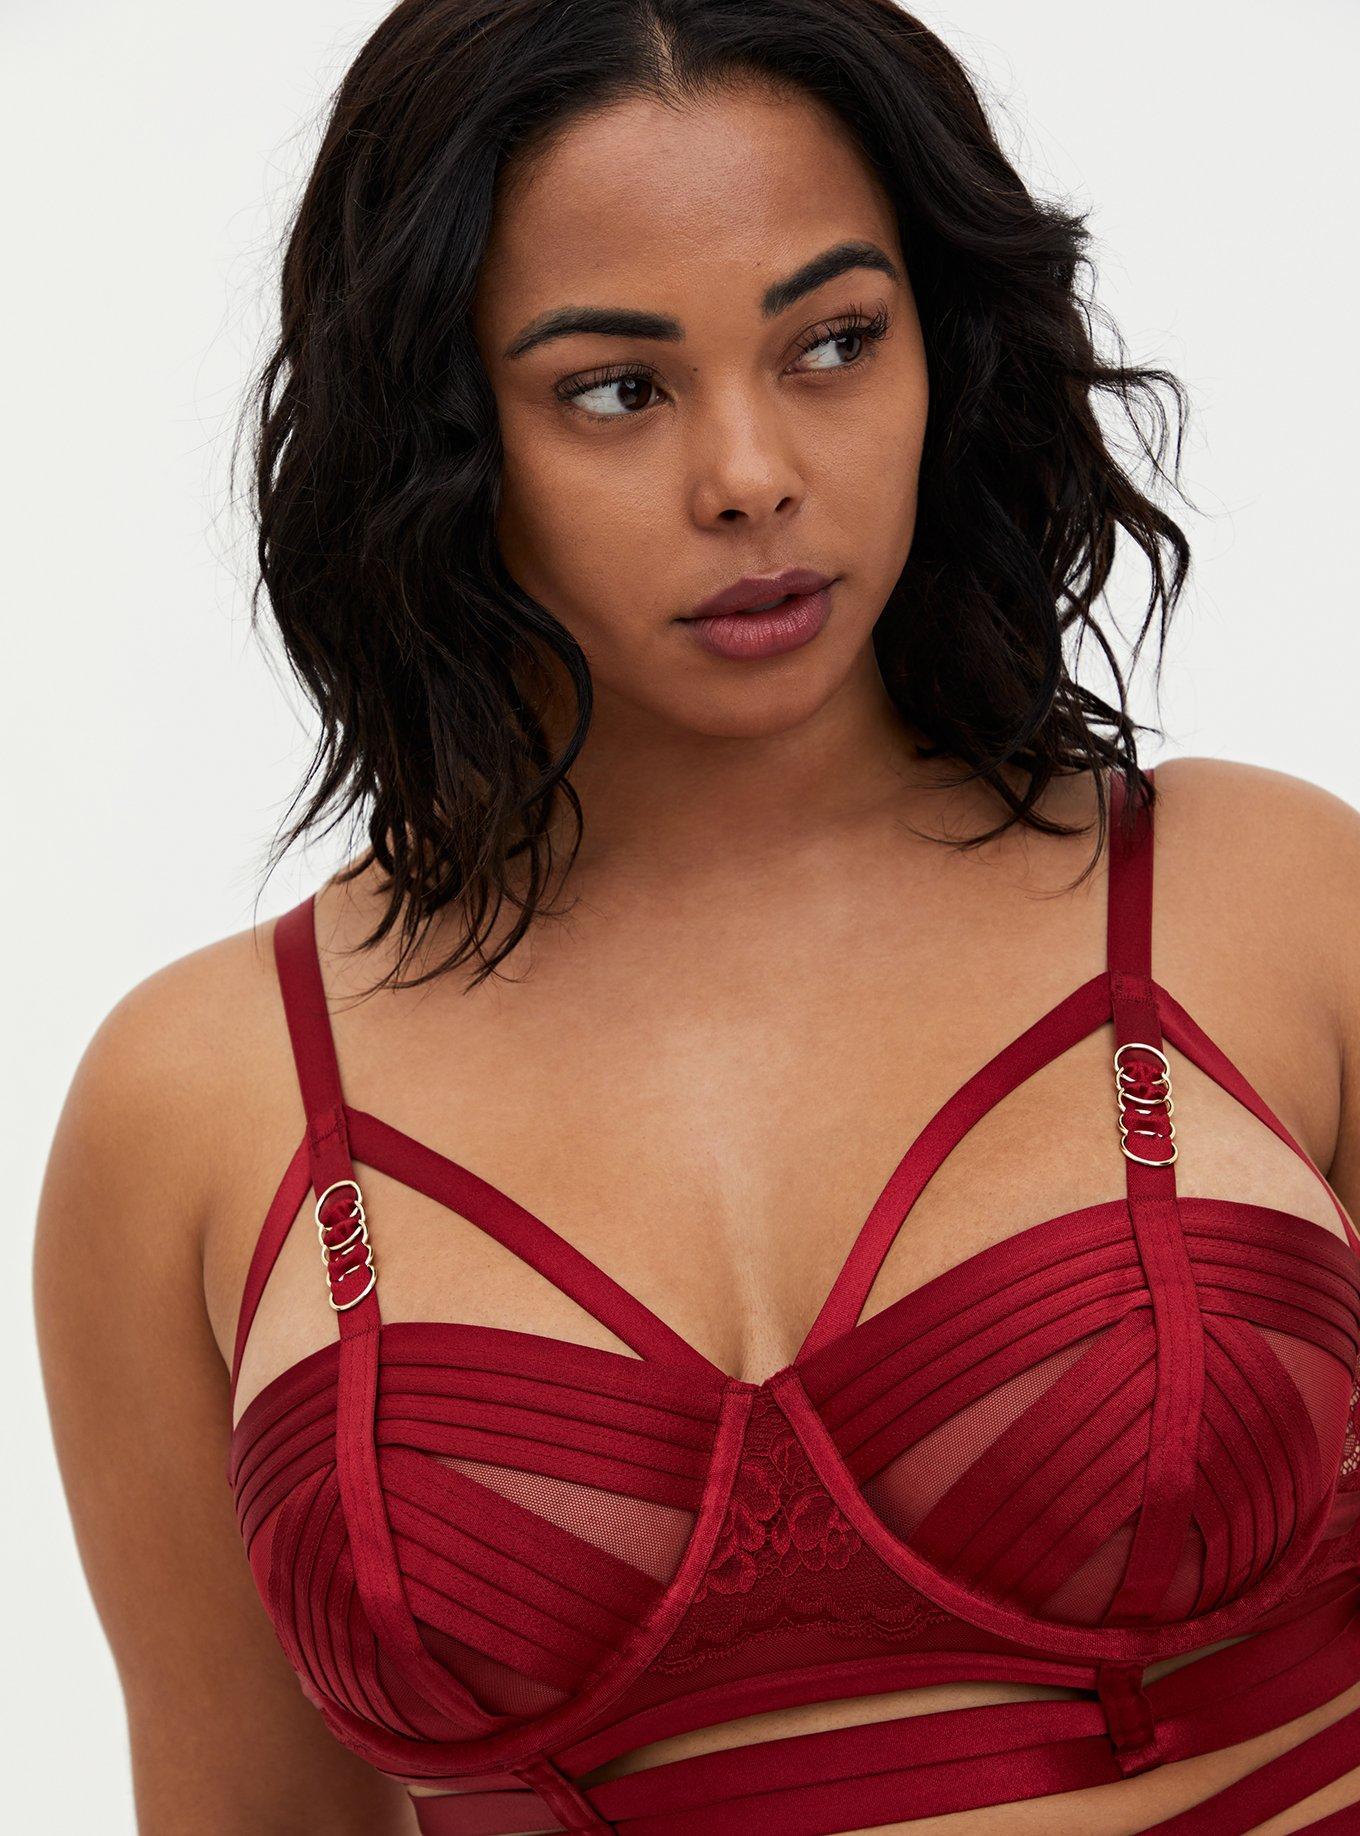 Plus Size - Straps And Rings Satin Underwire Bra With Mesh Cup